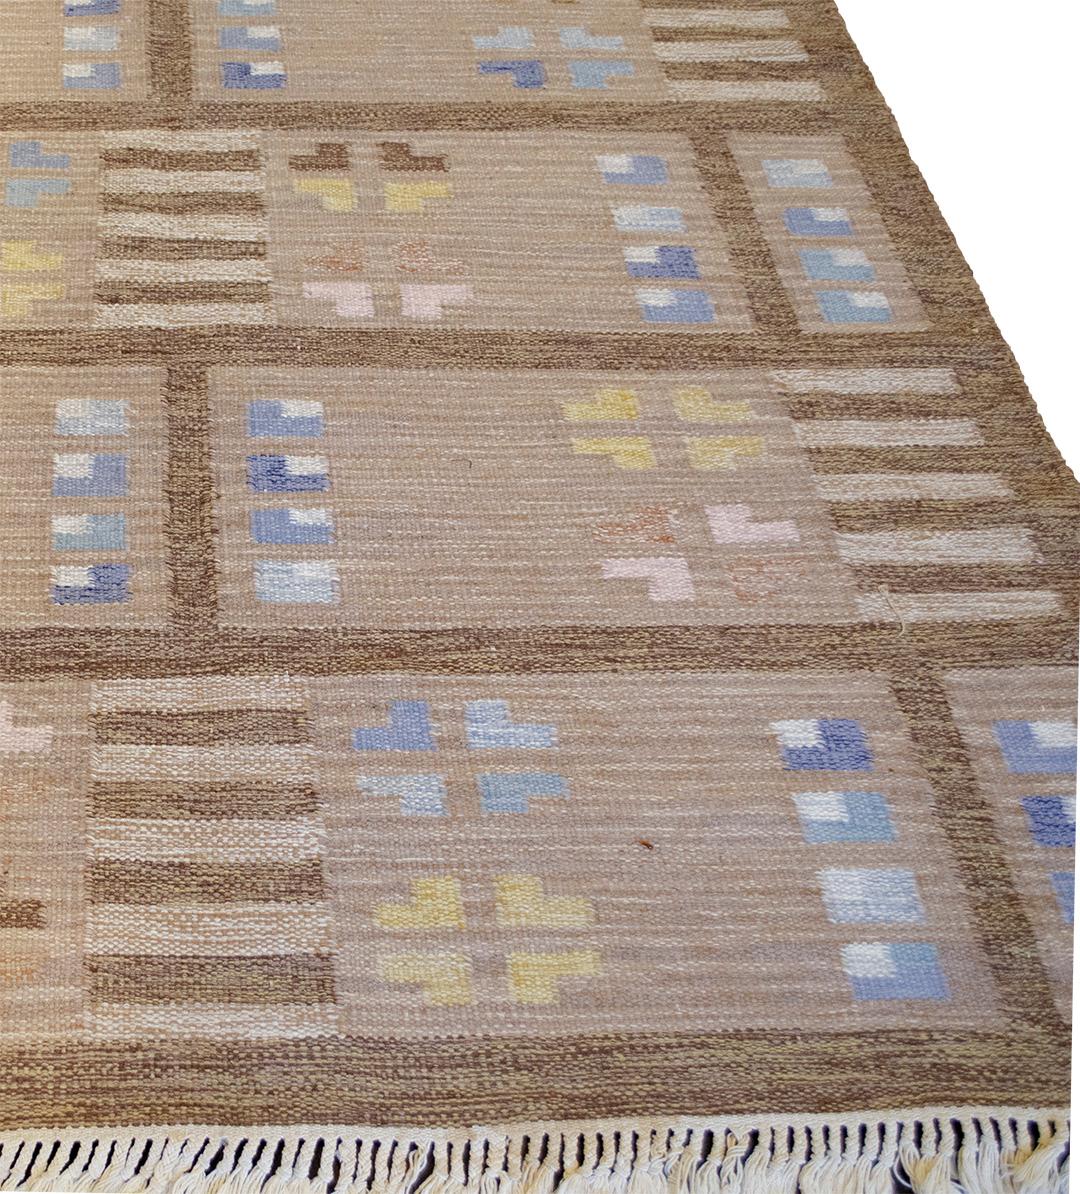 This vintage handwoven signed Swedish rug has a shaded refined mole brown field with scattered varied geometric shapes, in a darker brown border. Signed by the original artist.